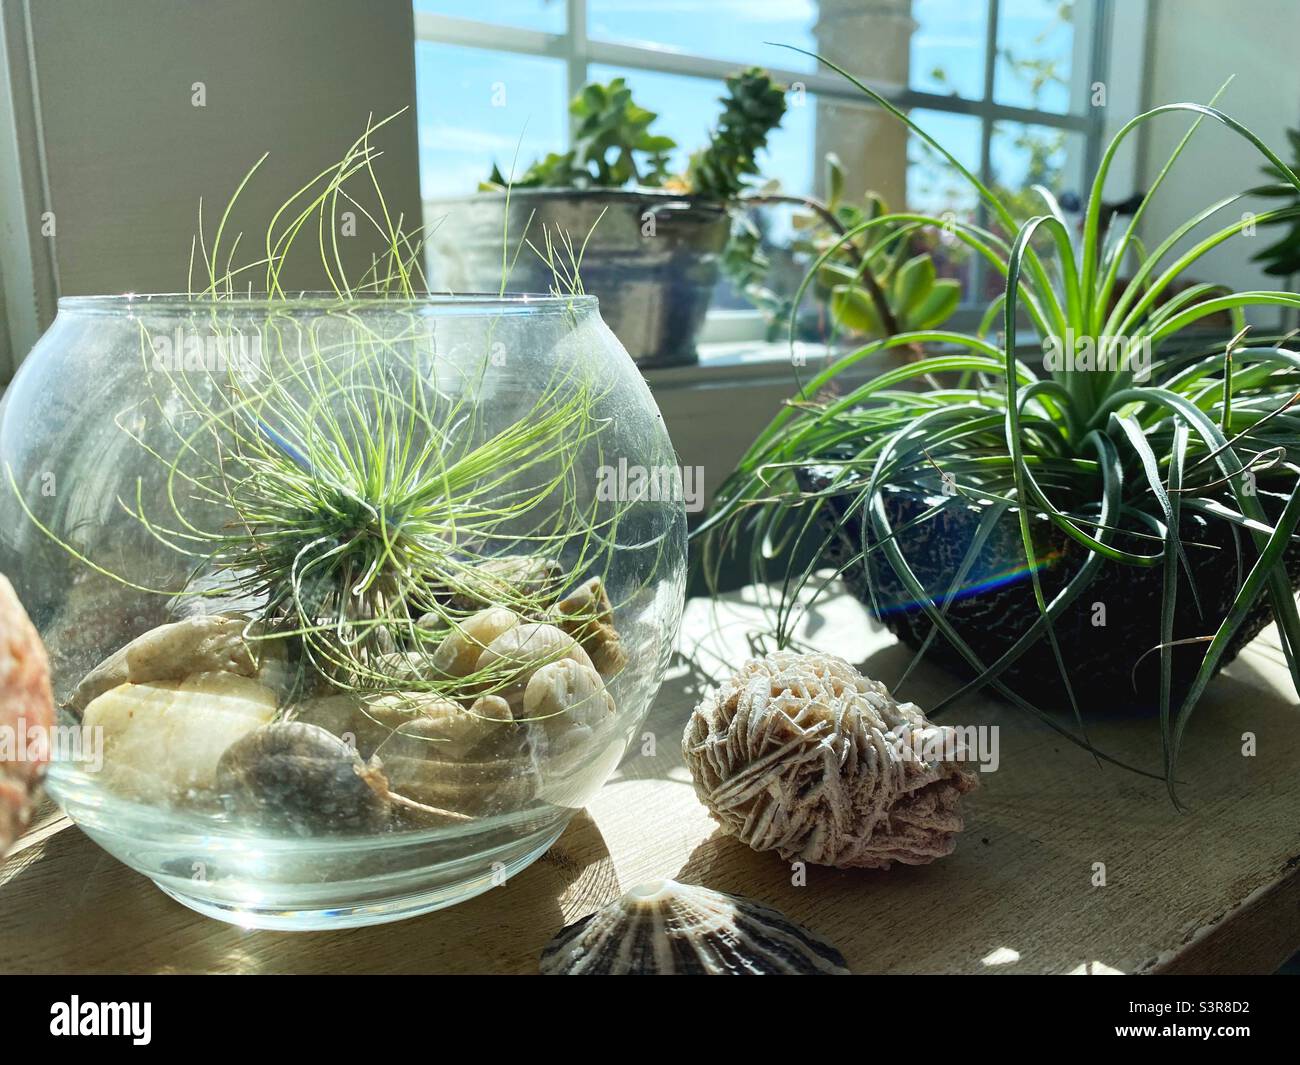 Tillandsia air plants and nature objects on a shelf in front of a window. Stock Photo